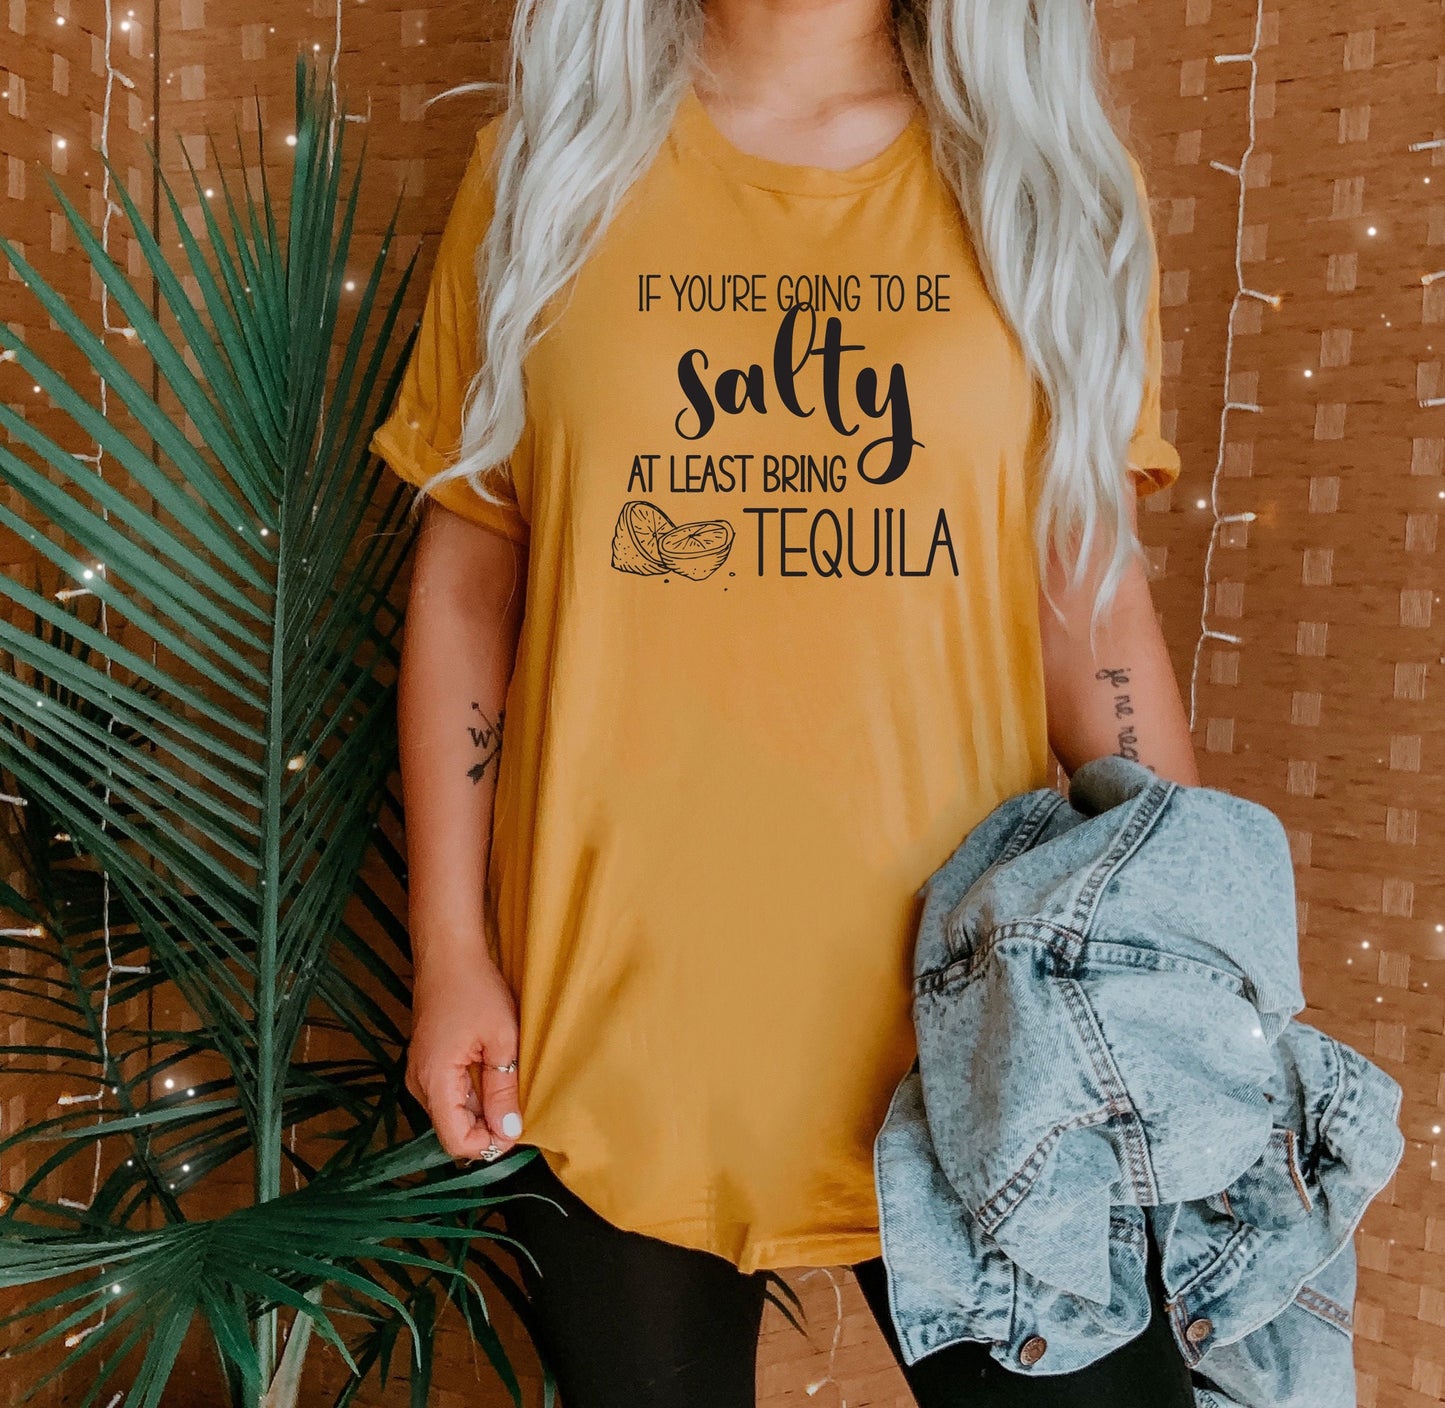 If You're Going To Be Salty At Least Bring Tequila - Women's Funny T-shirt